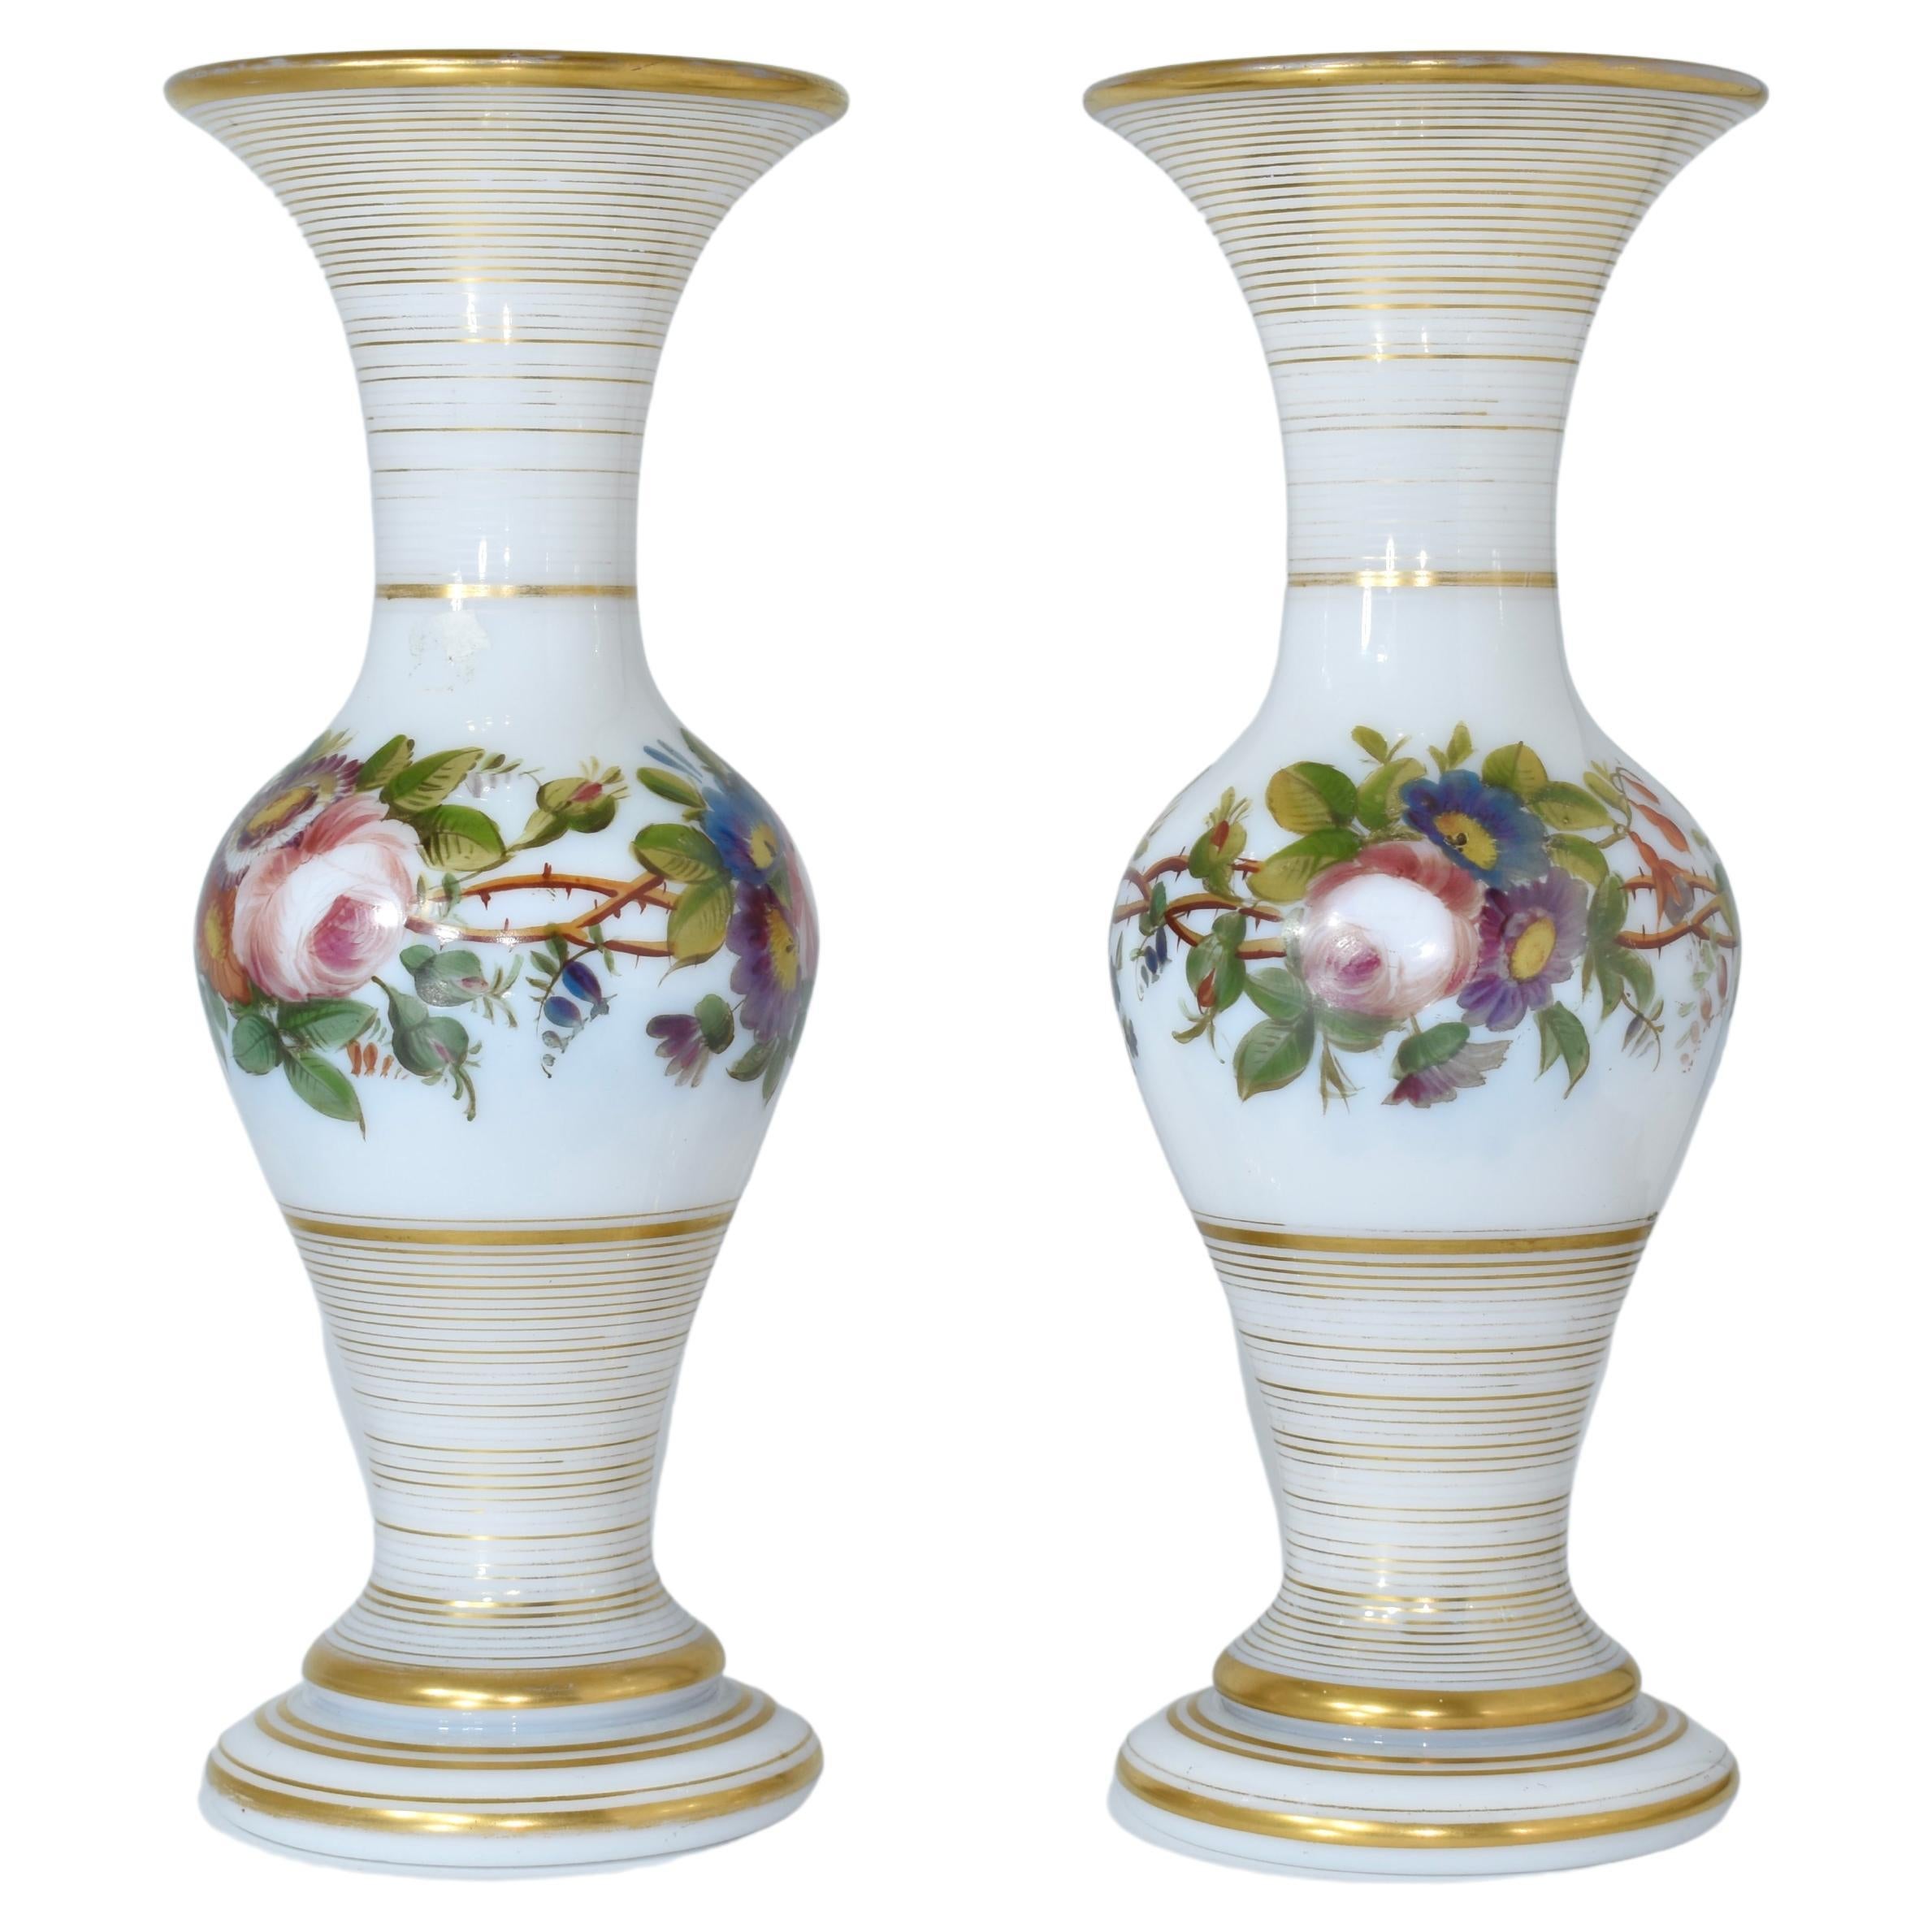 Fine Pair of Milky White Opaline Baccarat Glass Vases

High Quality Antique French Glass

Beautiful Circular Body with Folwer Decorations and Gilding Highlights

France, 19th century.